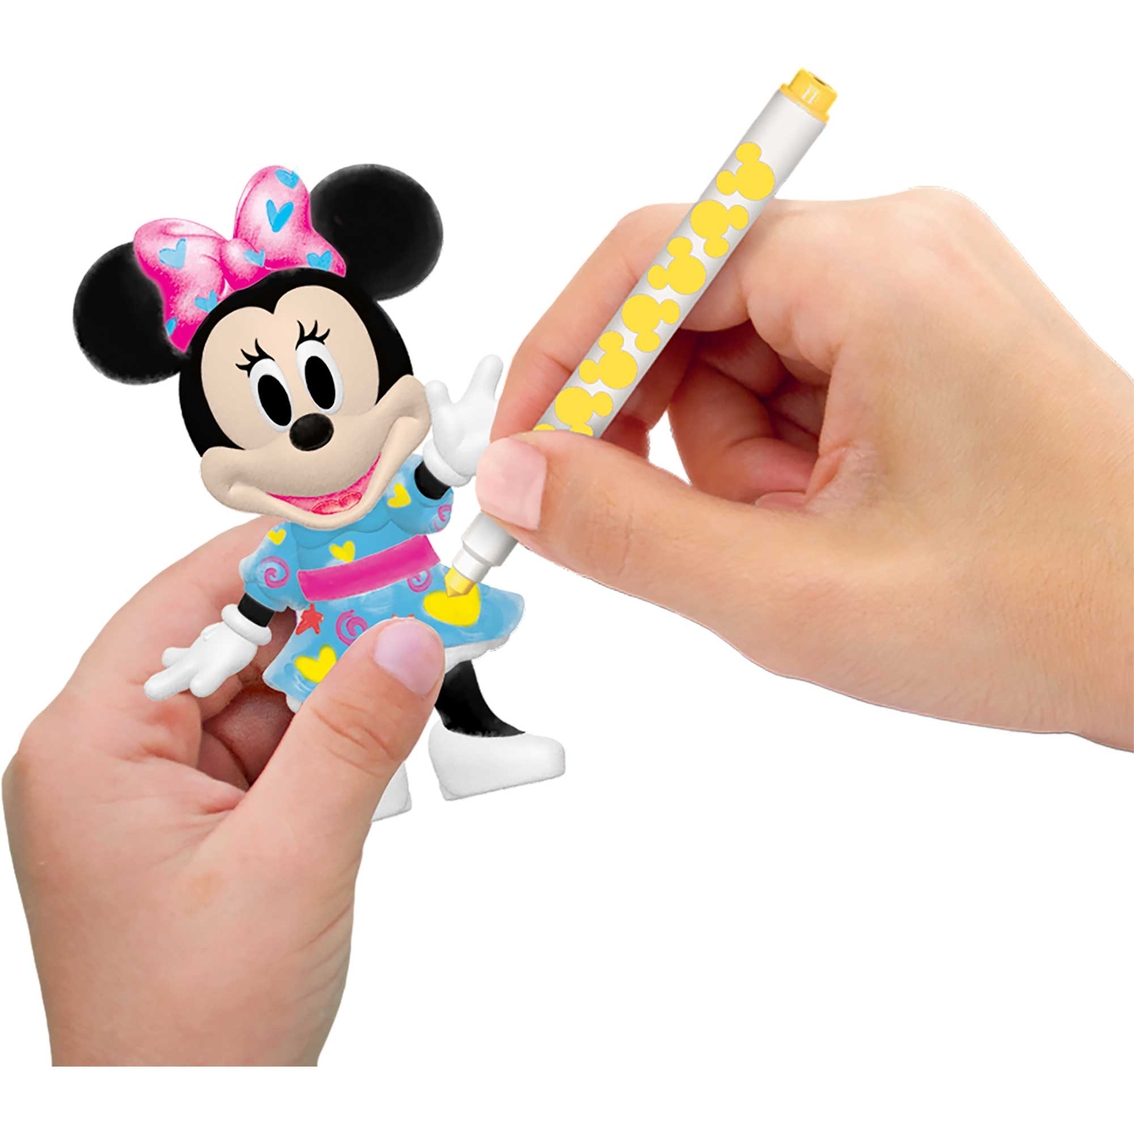 Cra-Z-Art Disney Mickey Mouse and Friends Color N' Recolor 3D Characters Set - Image 8 of 9